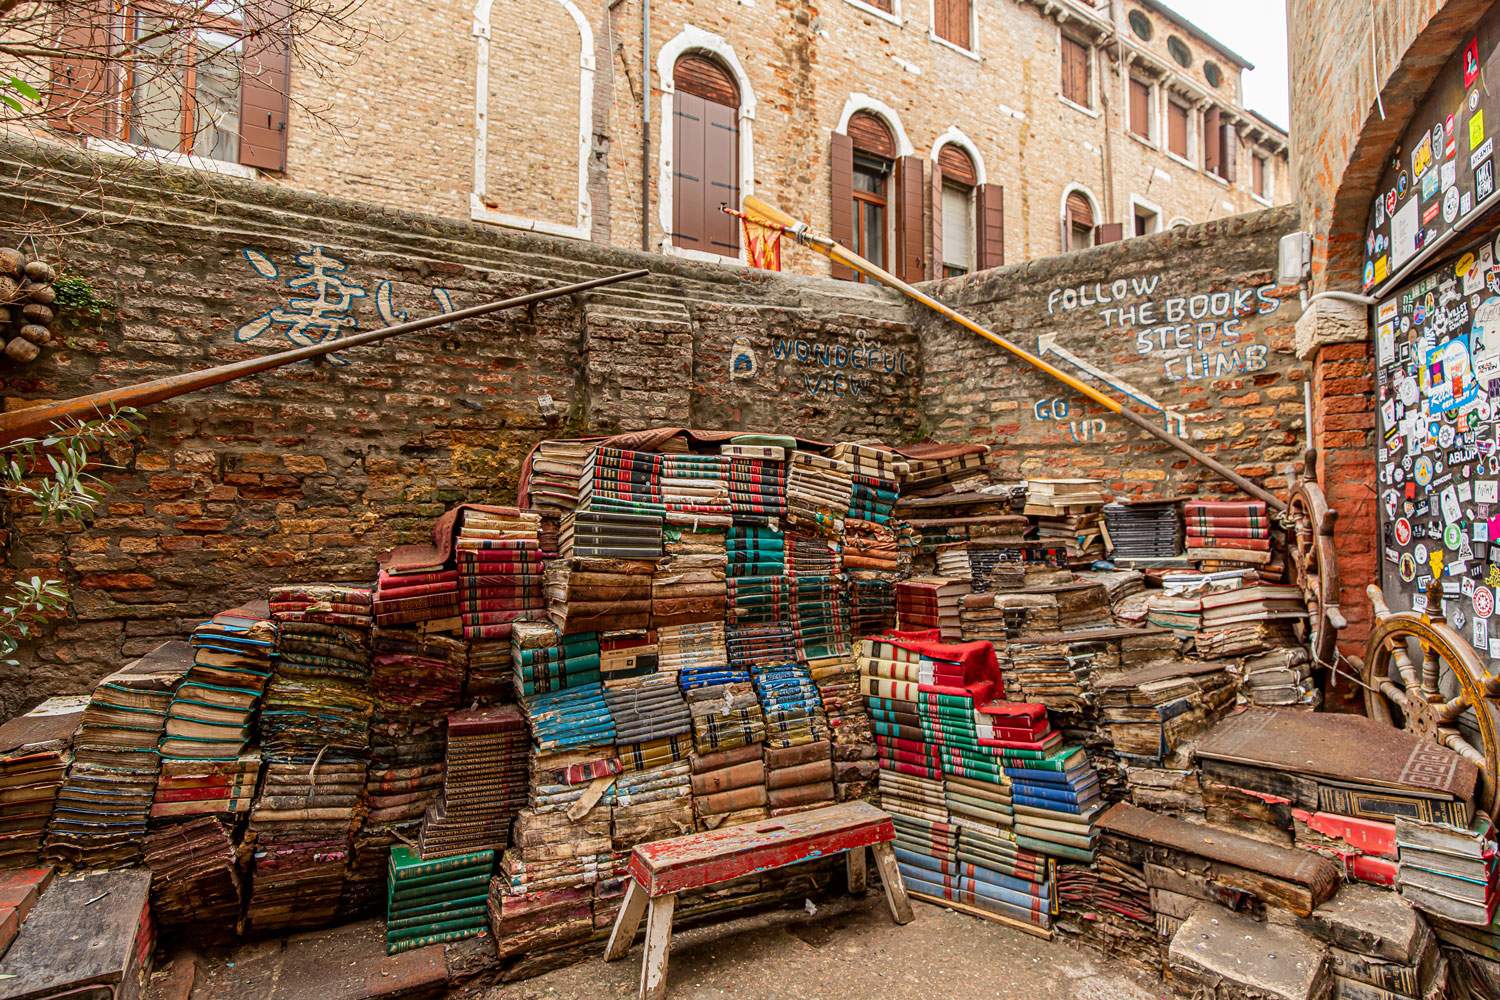 huge pile of books forming steps you can walk on at a book shop